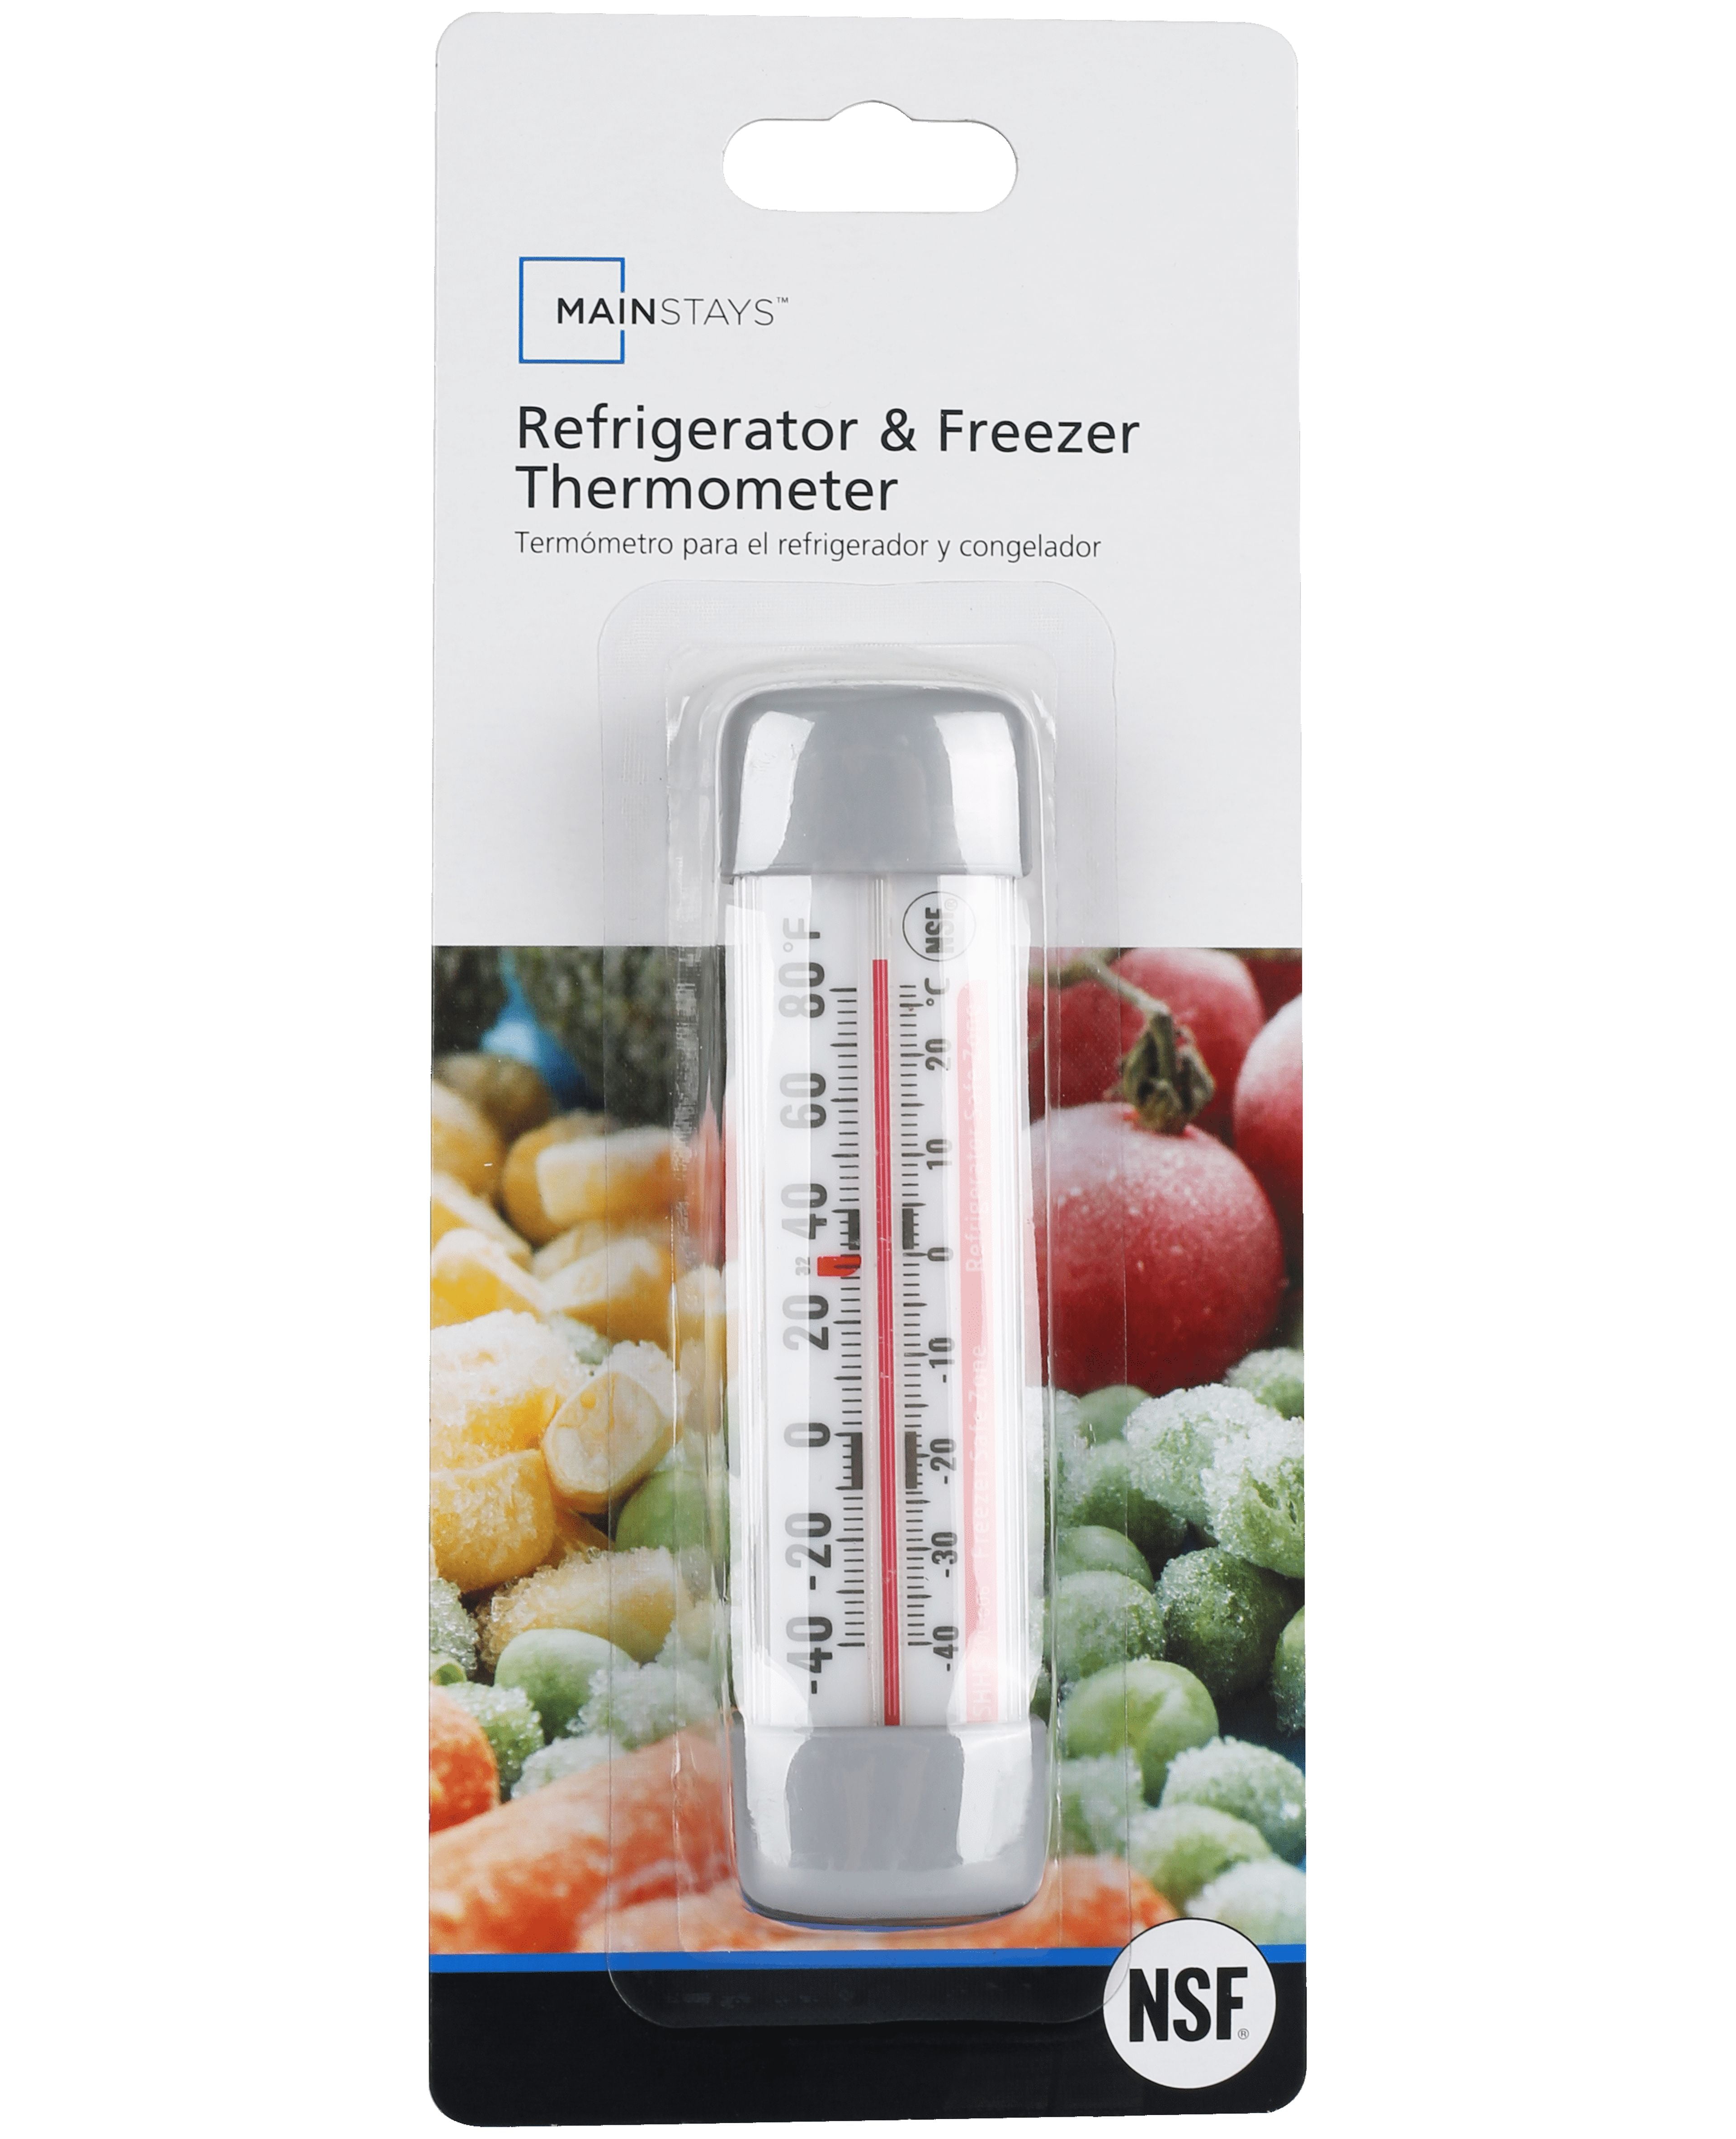 Why You Should Have a Thermometer in Your Refrigerator/Freezer